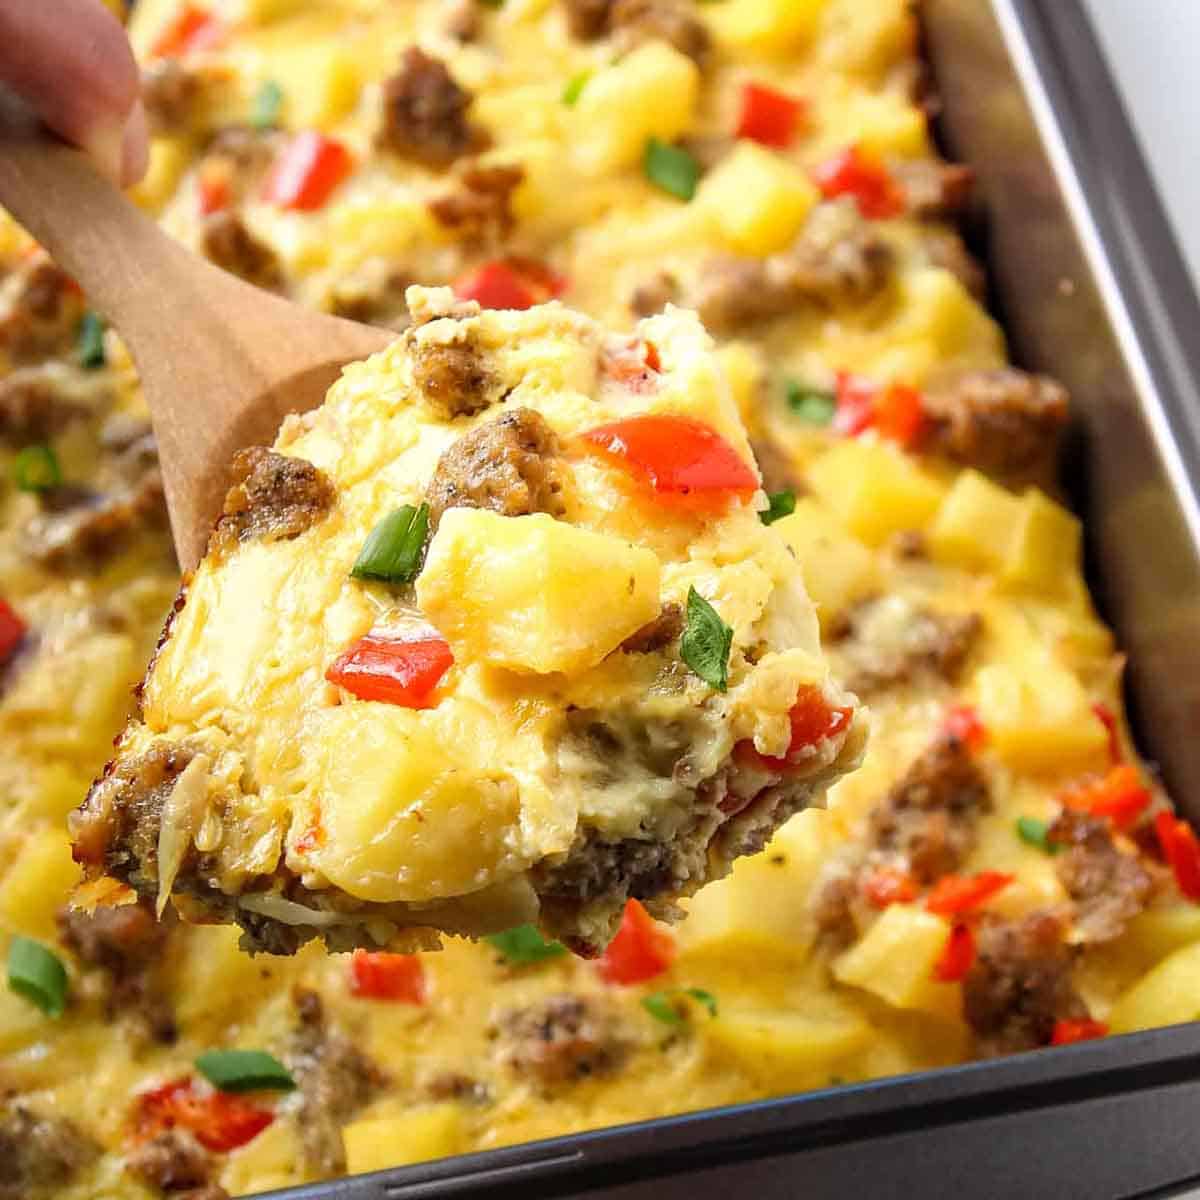 Breakfast Casserole with Eggs, Potatoes and Sausage » LeelaLicious